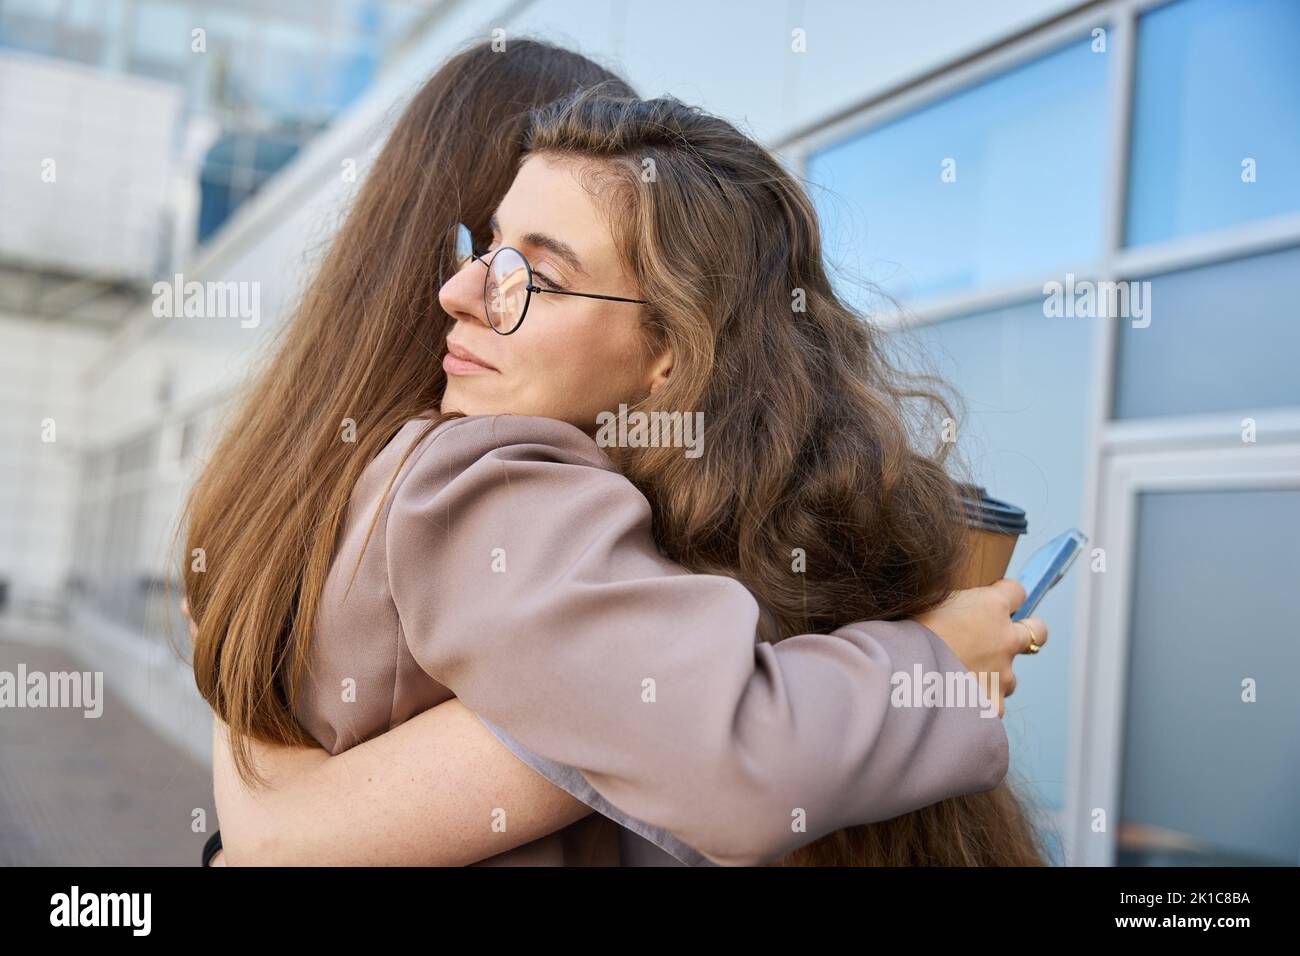 Two young women is hugging each other on the street Stock Photo